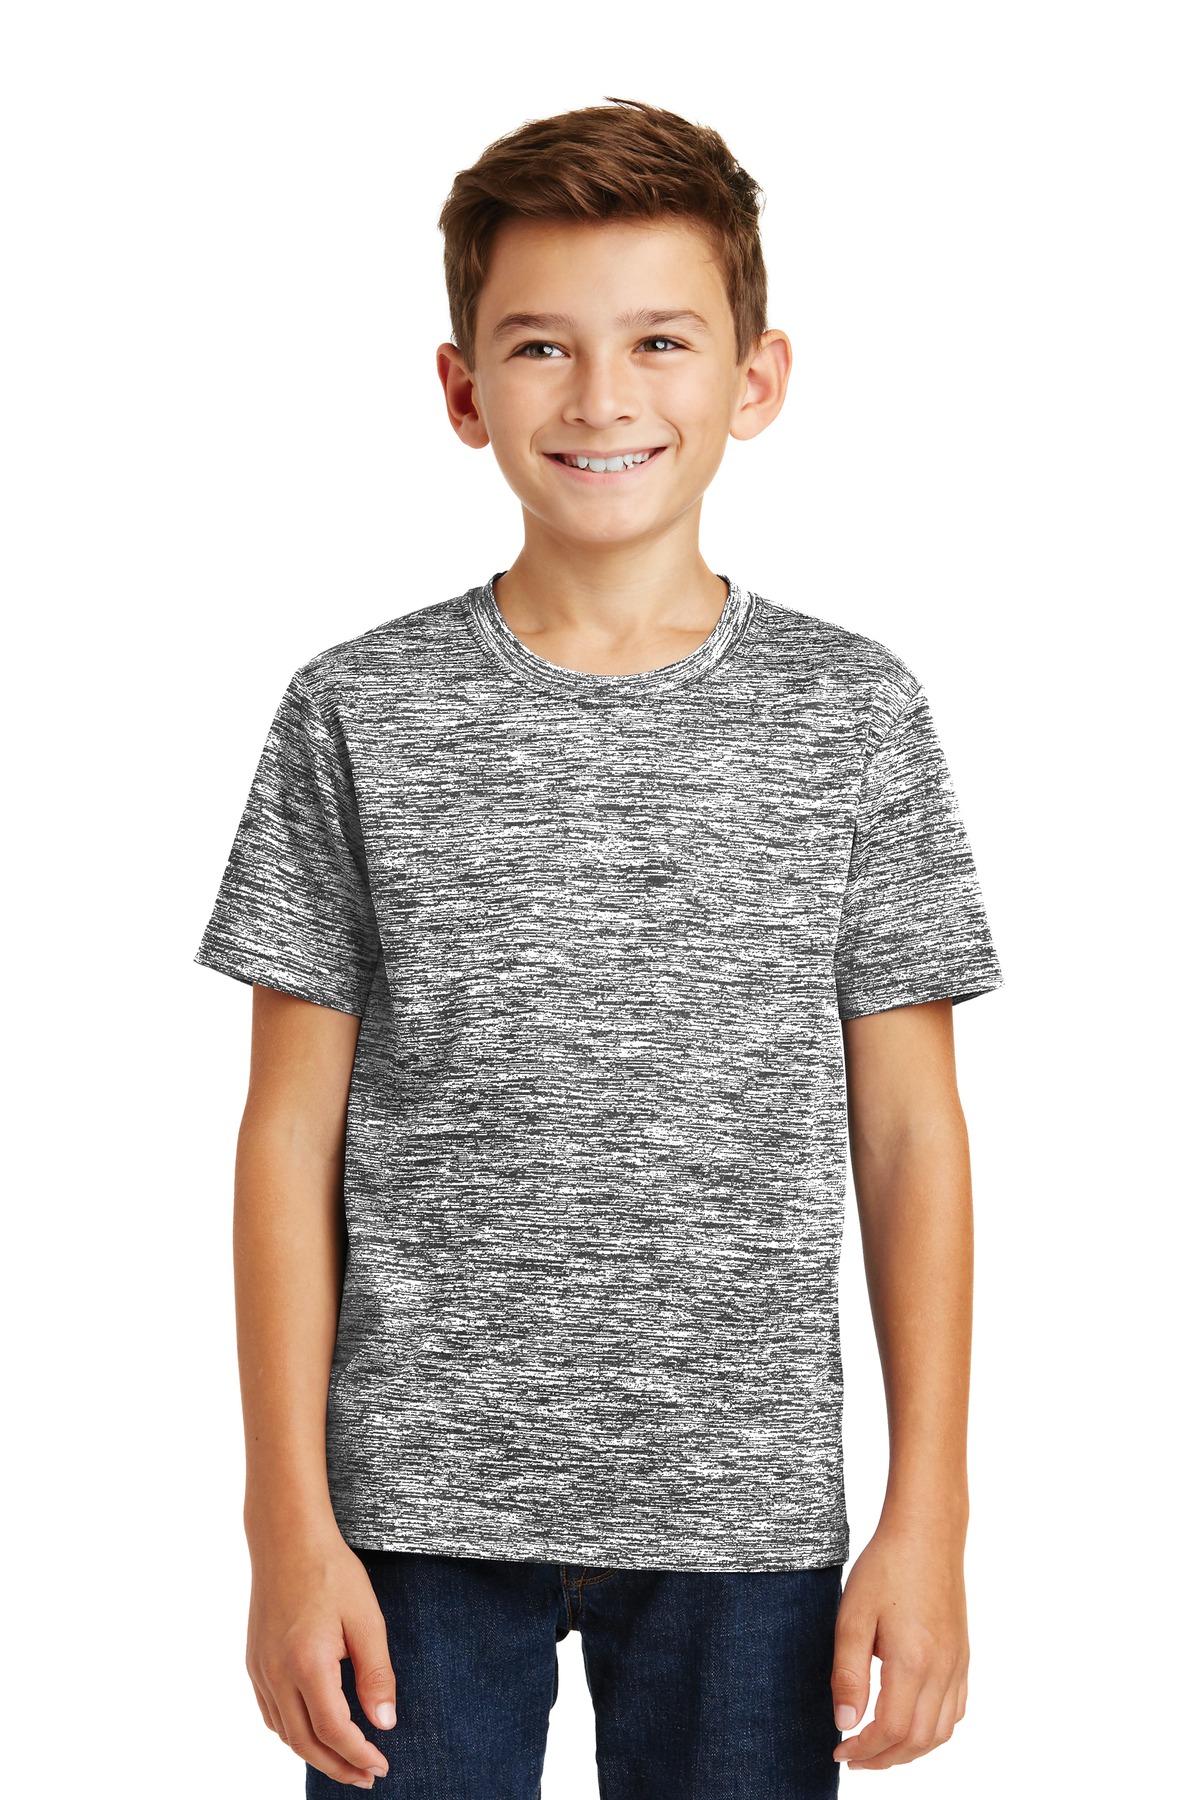 Sport-Tek Activewear Youth T-Shirts for Hospitality ® Youth PosiCharge® Electric Heather Tee.-Sport-Tek